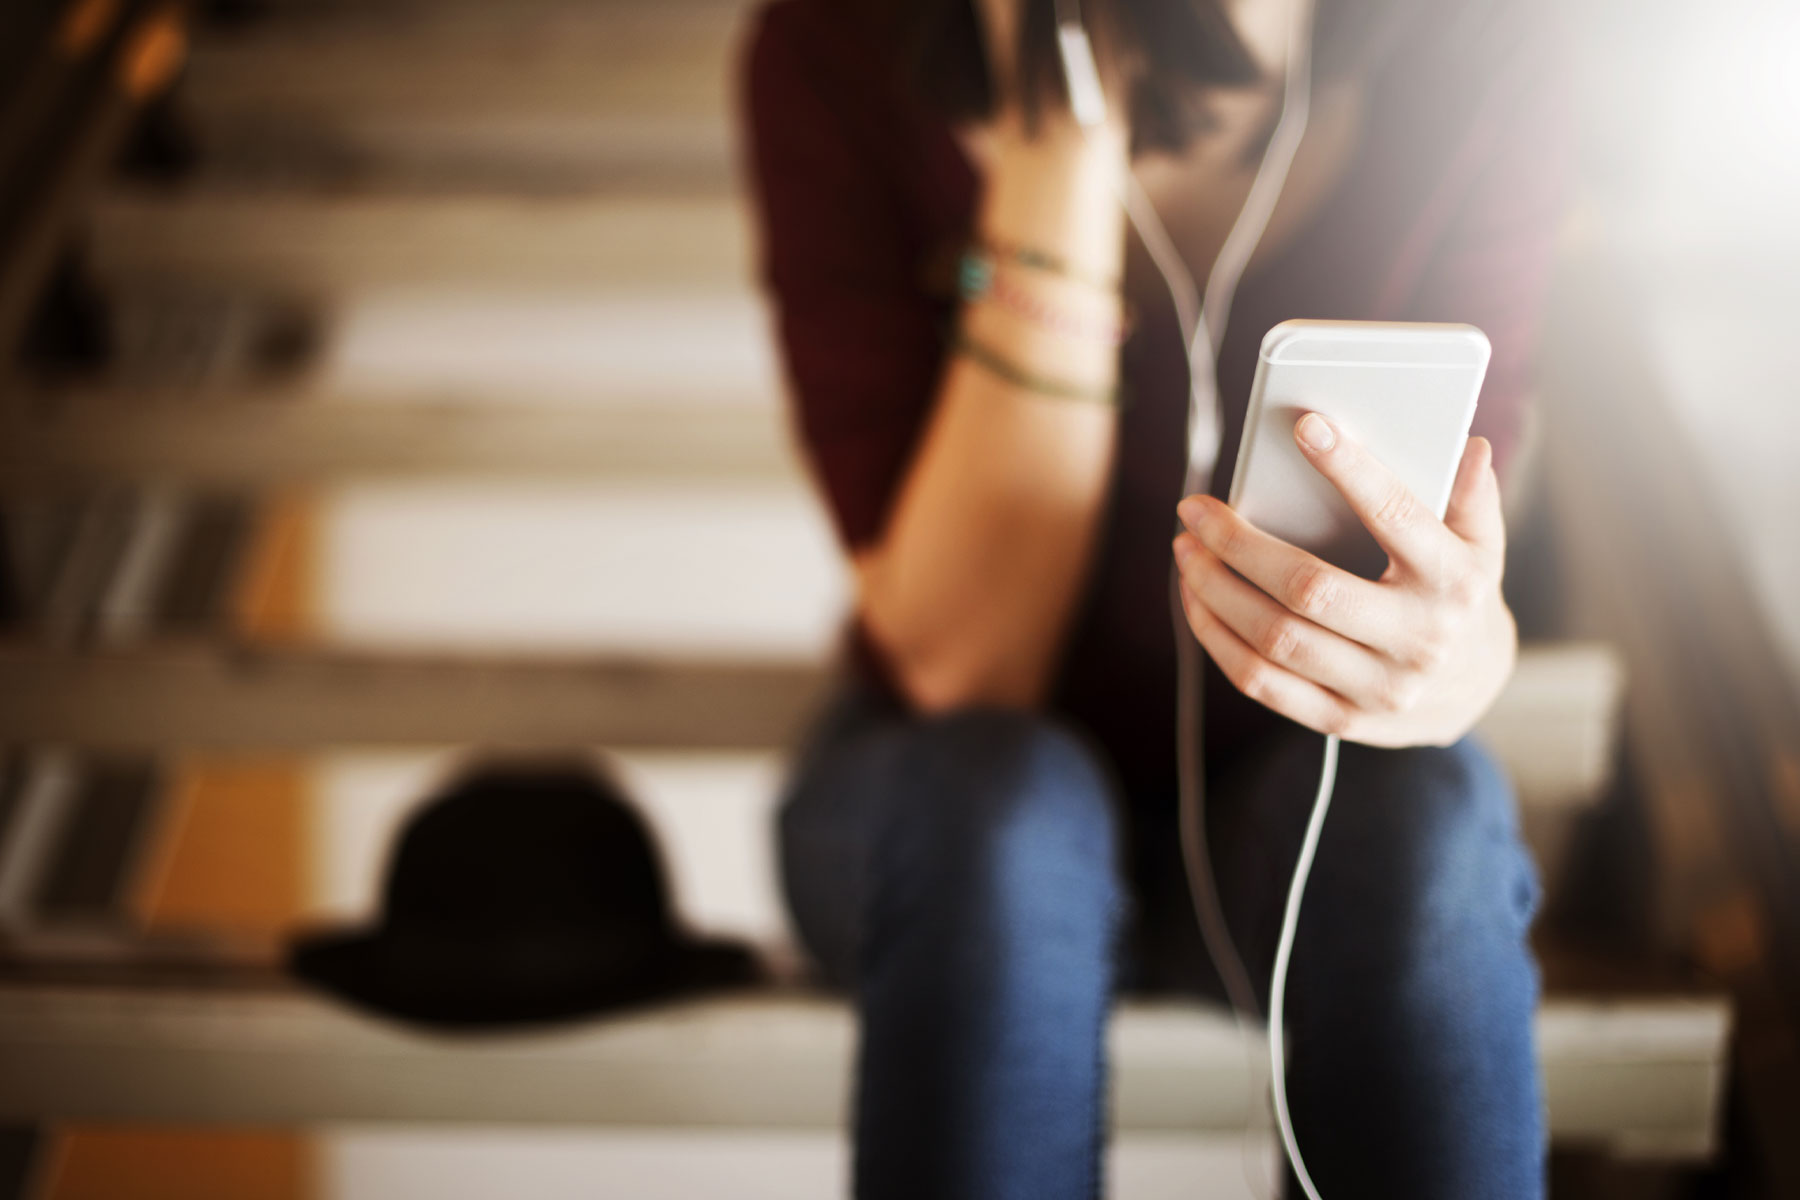 woman listening to podcast or music on her phone